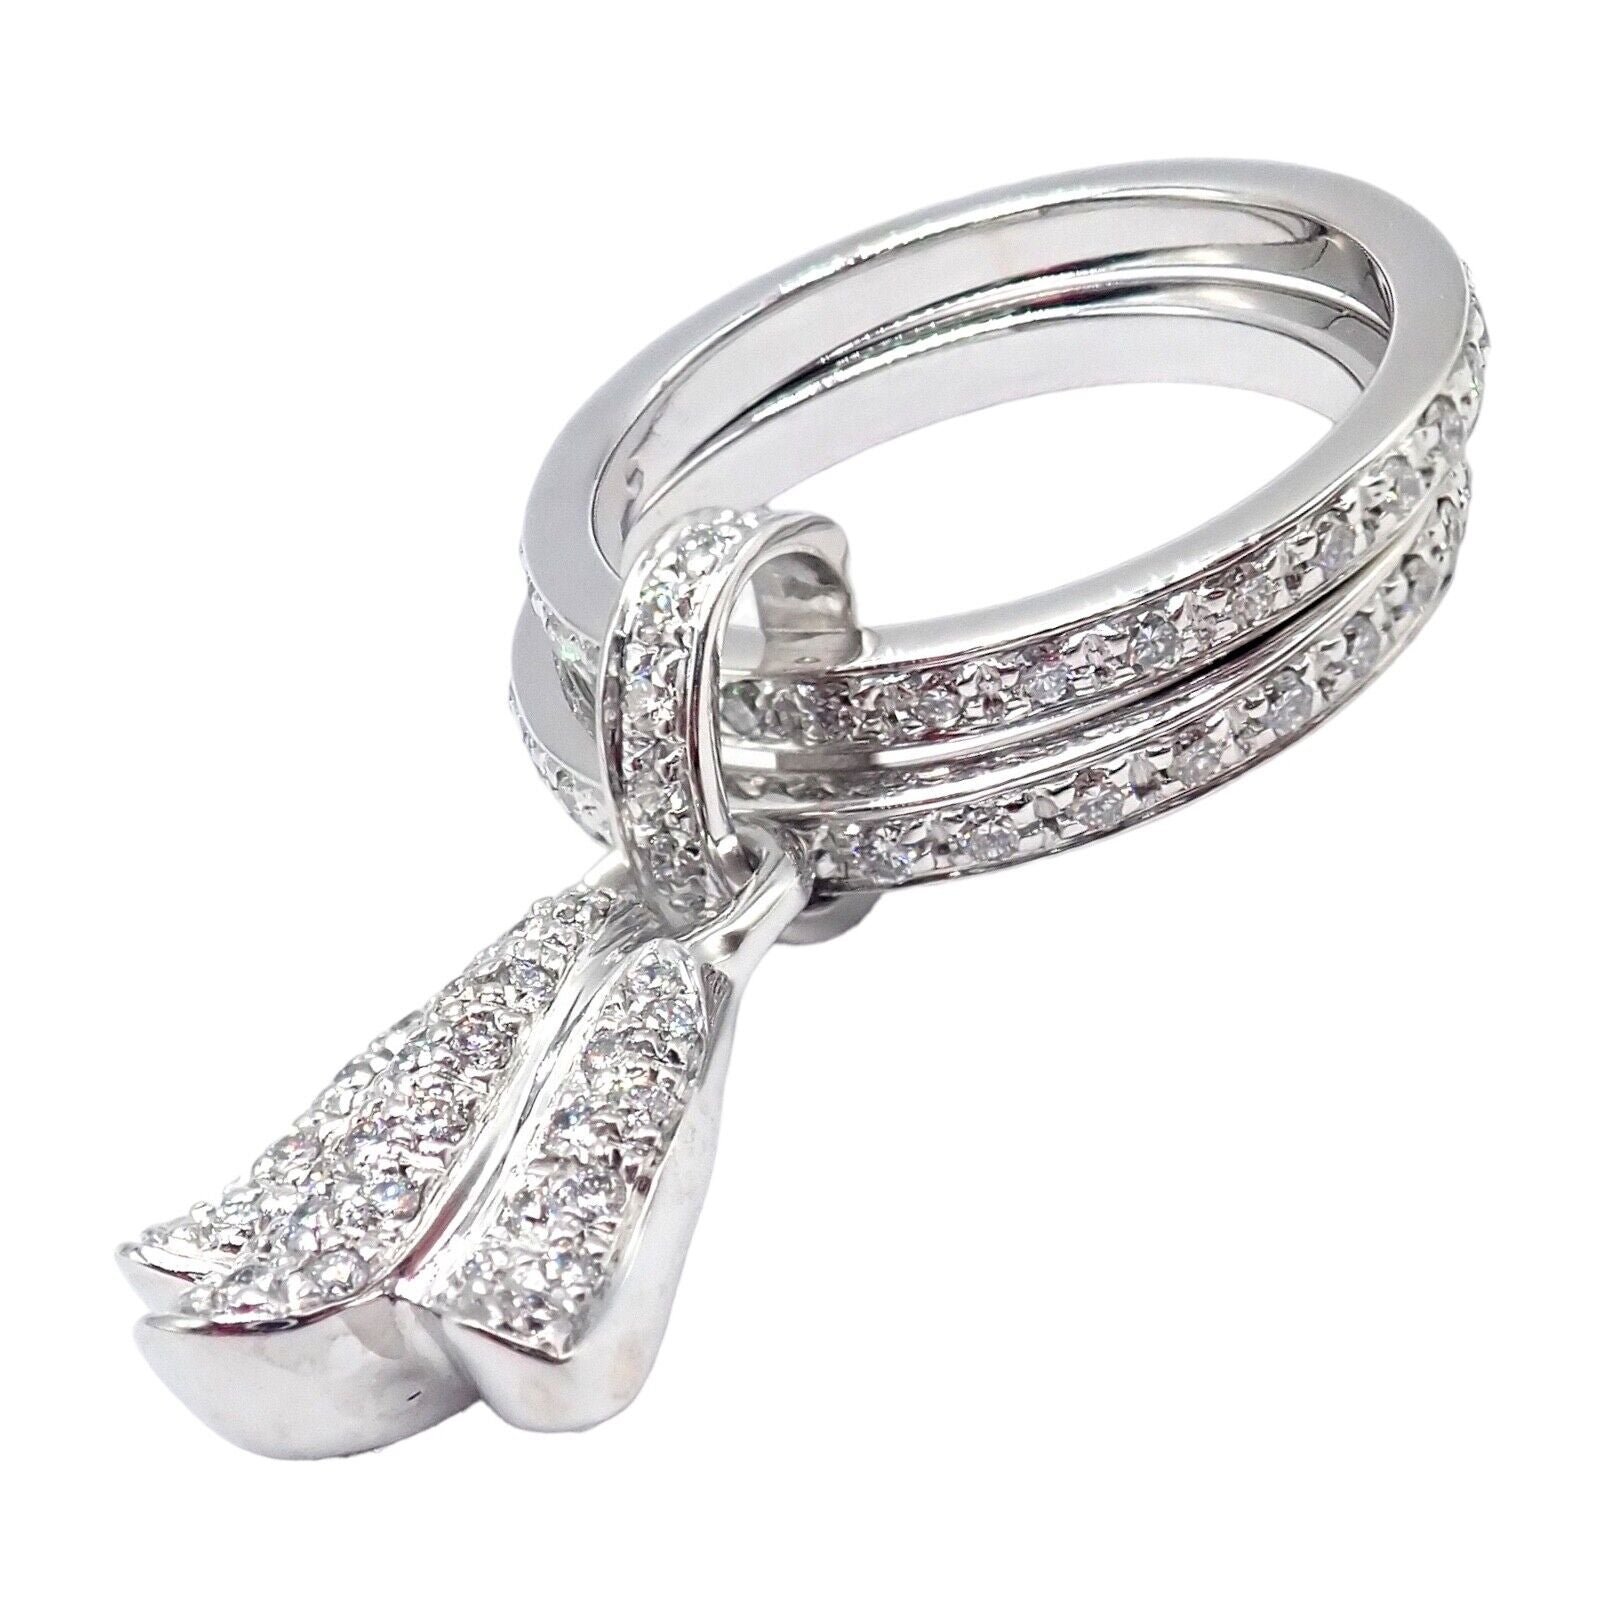 Piaget Jewelry & Watches:Fine Jewelry:Rings Authentic! Piaget 18k White Gold Diamond Double Band Flower Ring